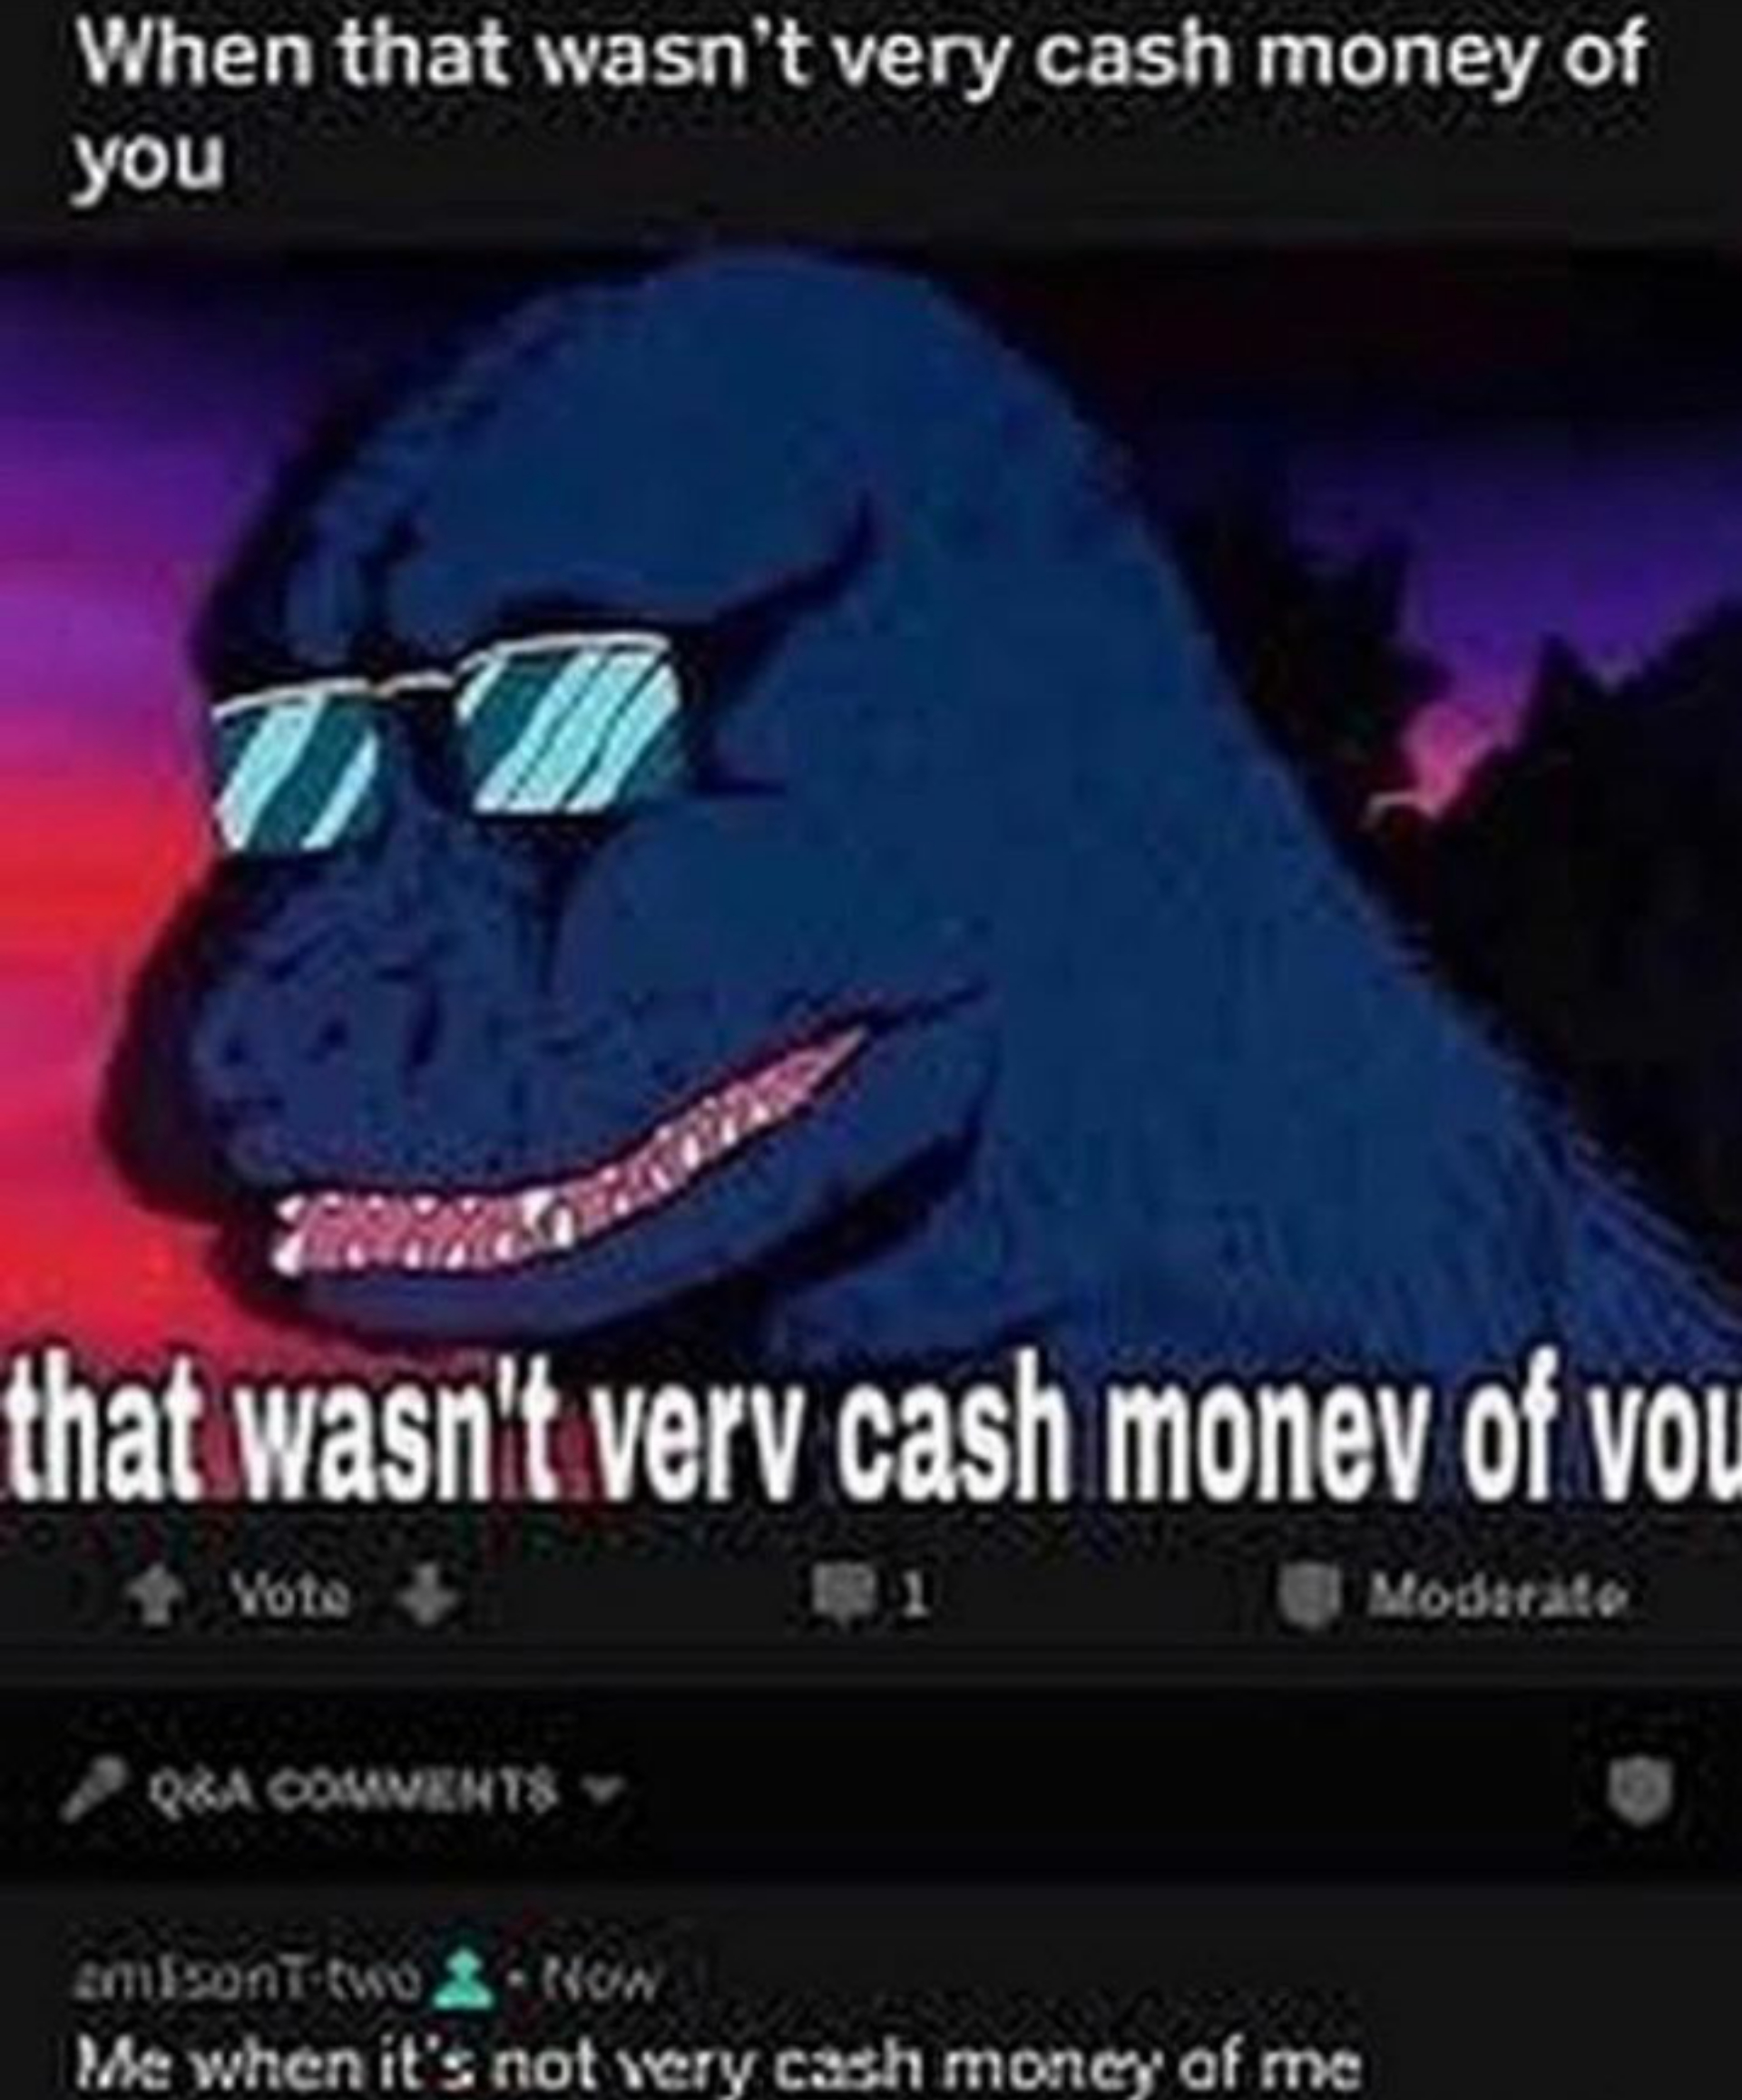 That wasn't very cash money of him